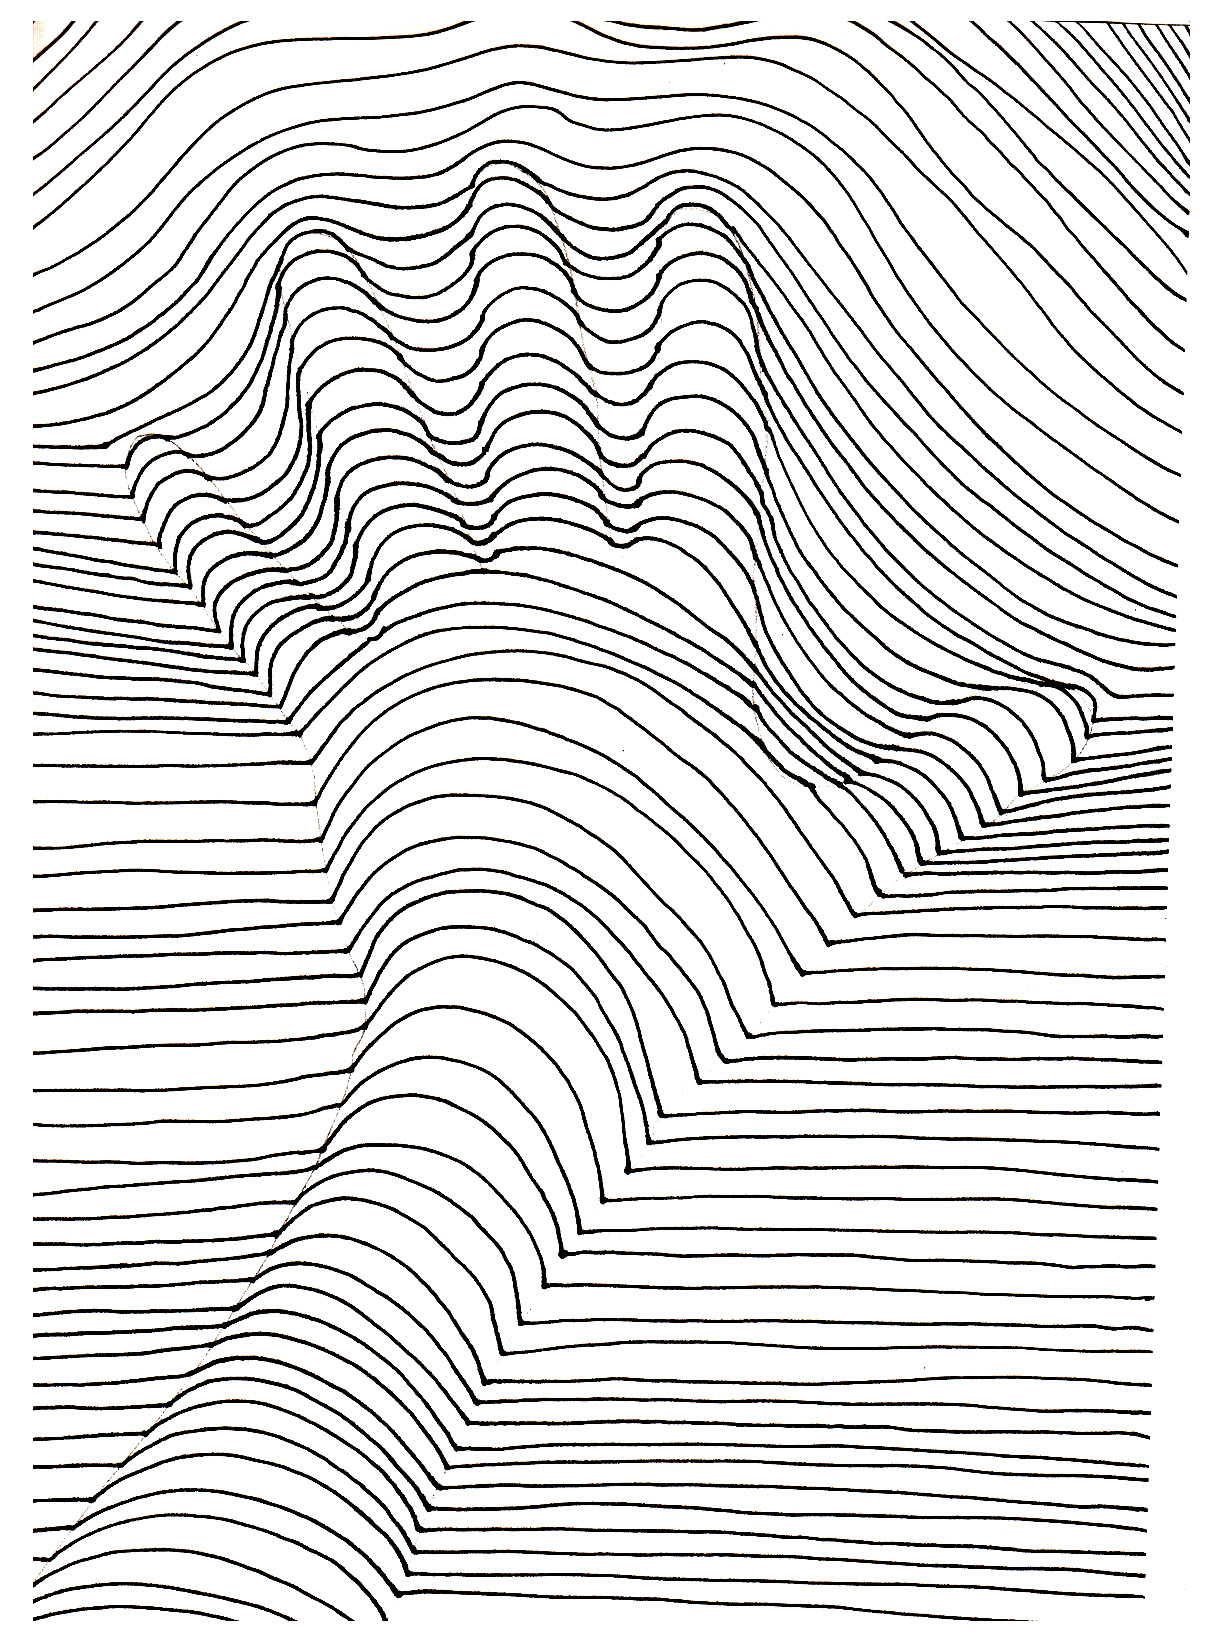 op art coloring pages